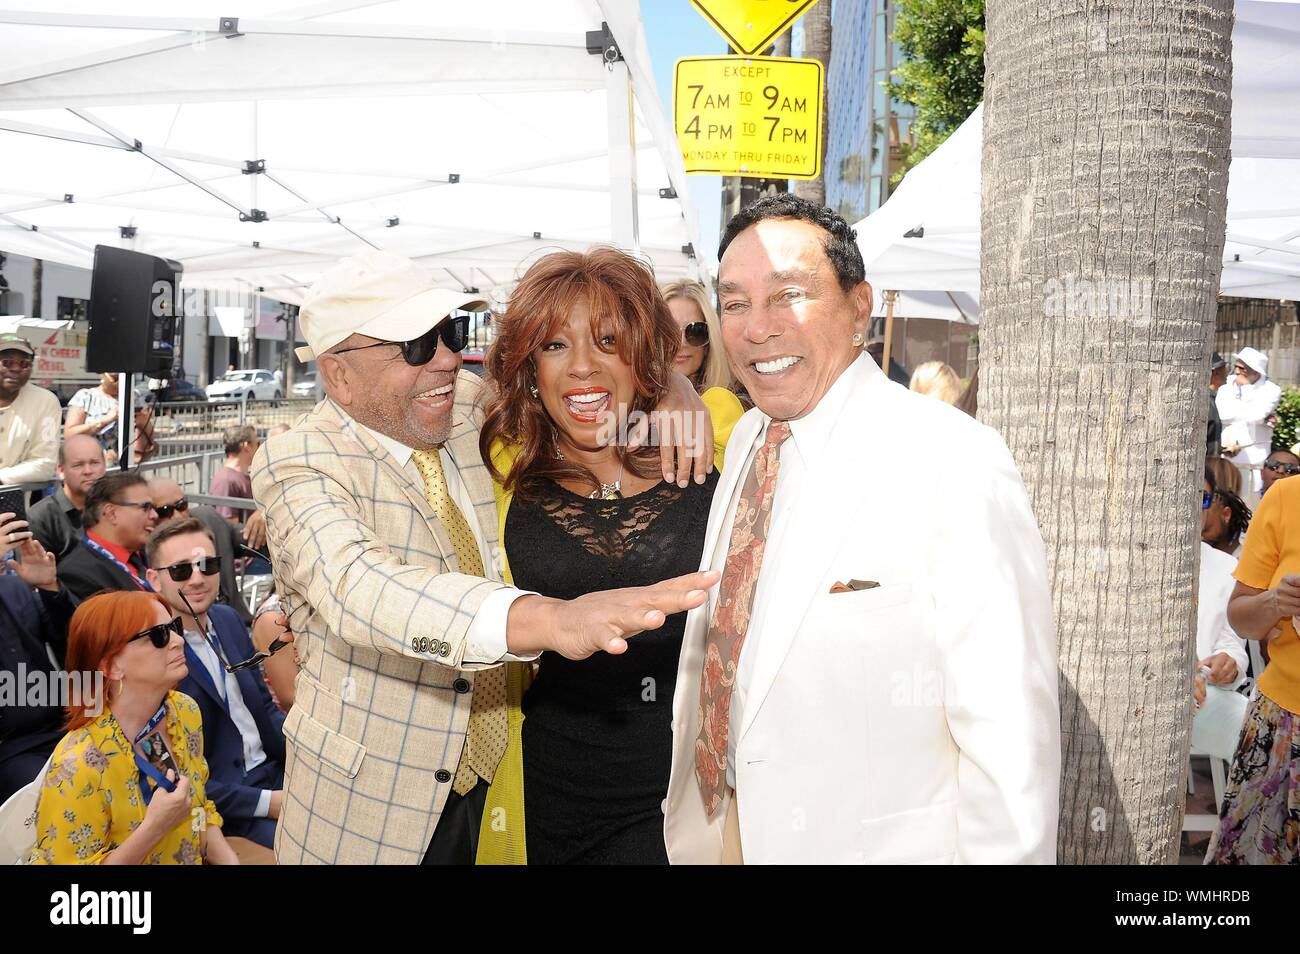 Los Angeles, CA. 4th Sep, 2019. Smokey Robinson, Berry Gordy Jr., Mary Wilson at the induction ceremony for Posthumous Star on the Hollywood Walk of Fame for Jackie Wilson, Hollywood Boulevard, Los Angeles, CA September 4, 2019. Credit: Michael Germana/Everett Collection/Alamy Live News Stock Photo